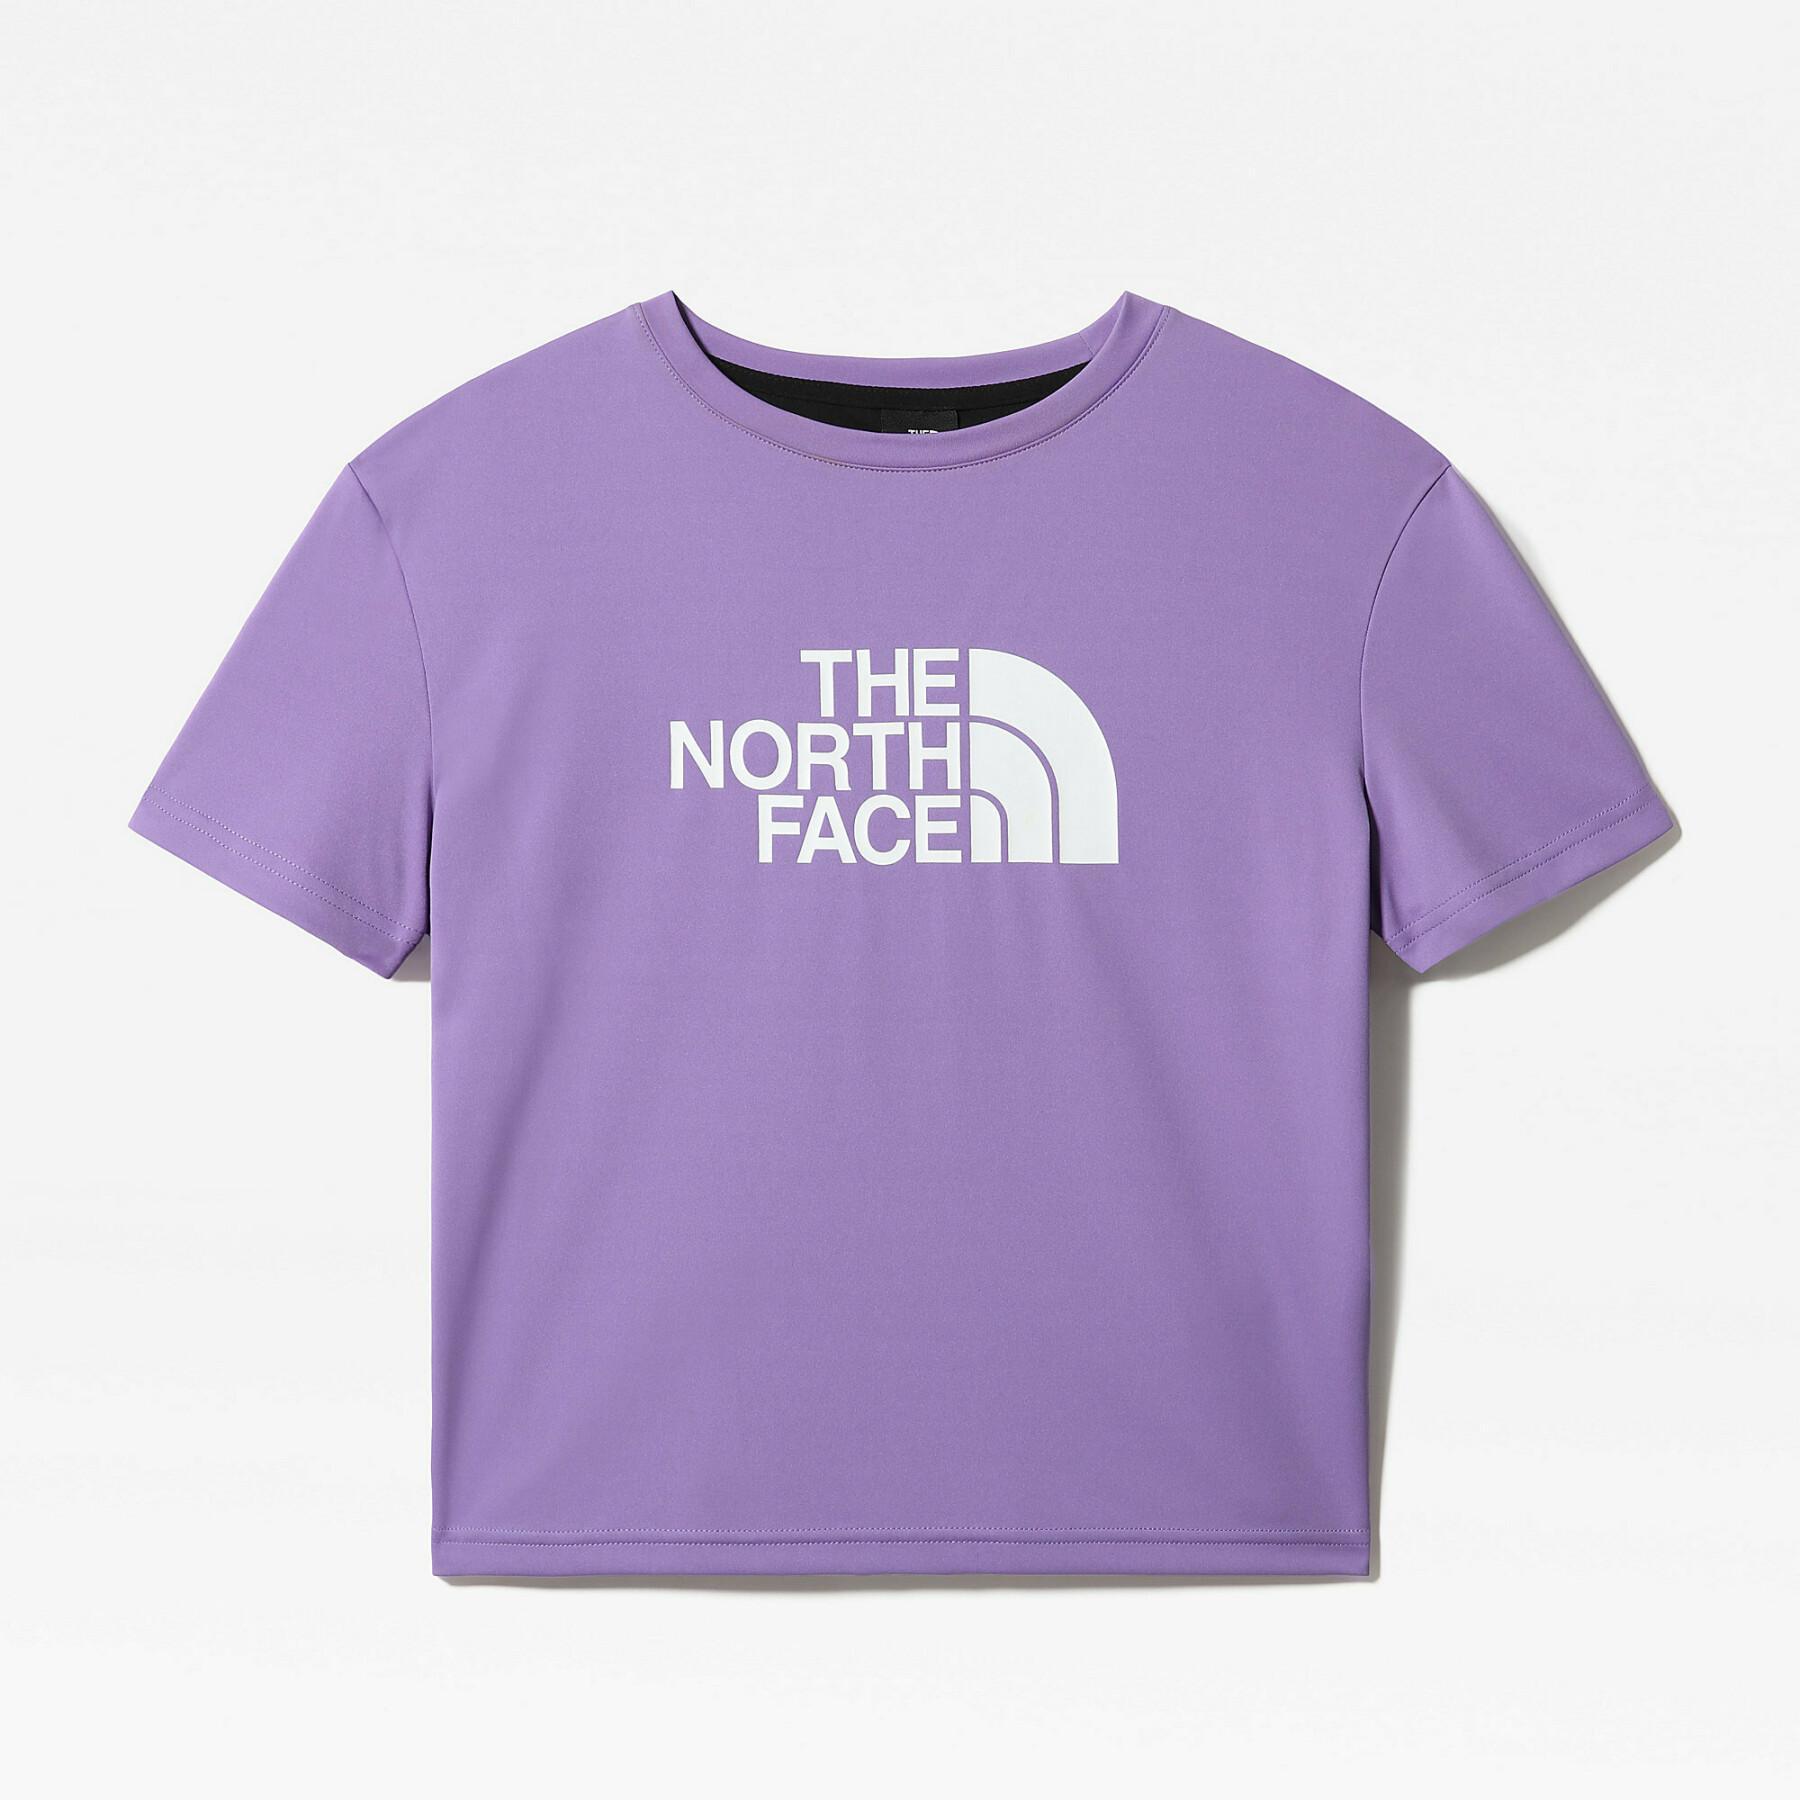 Camiseta de mujer The North Face Court Mountain Athletics